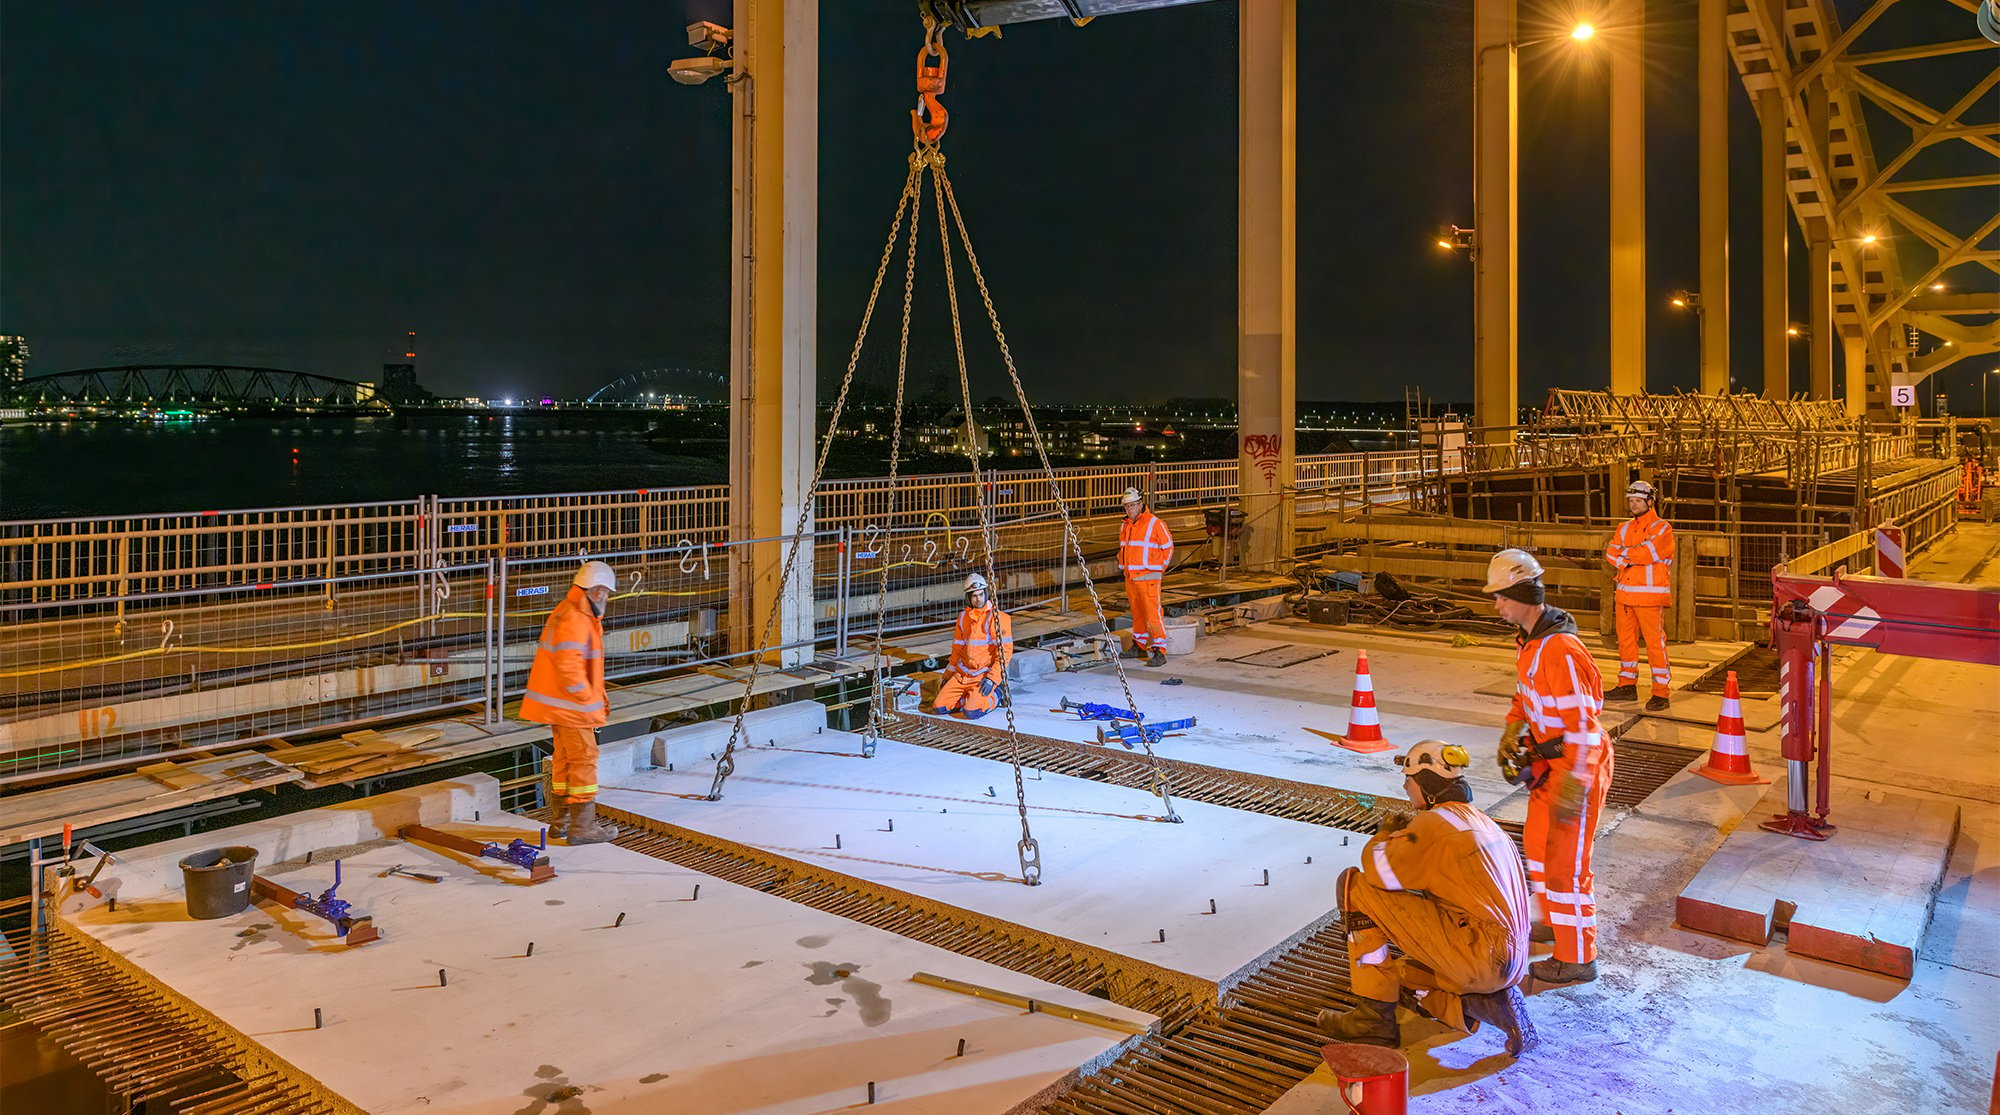 Waalbrug bridge with operational team on site placing the concrete deck.